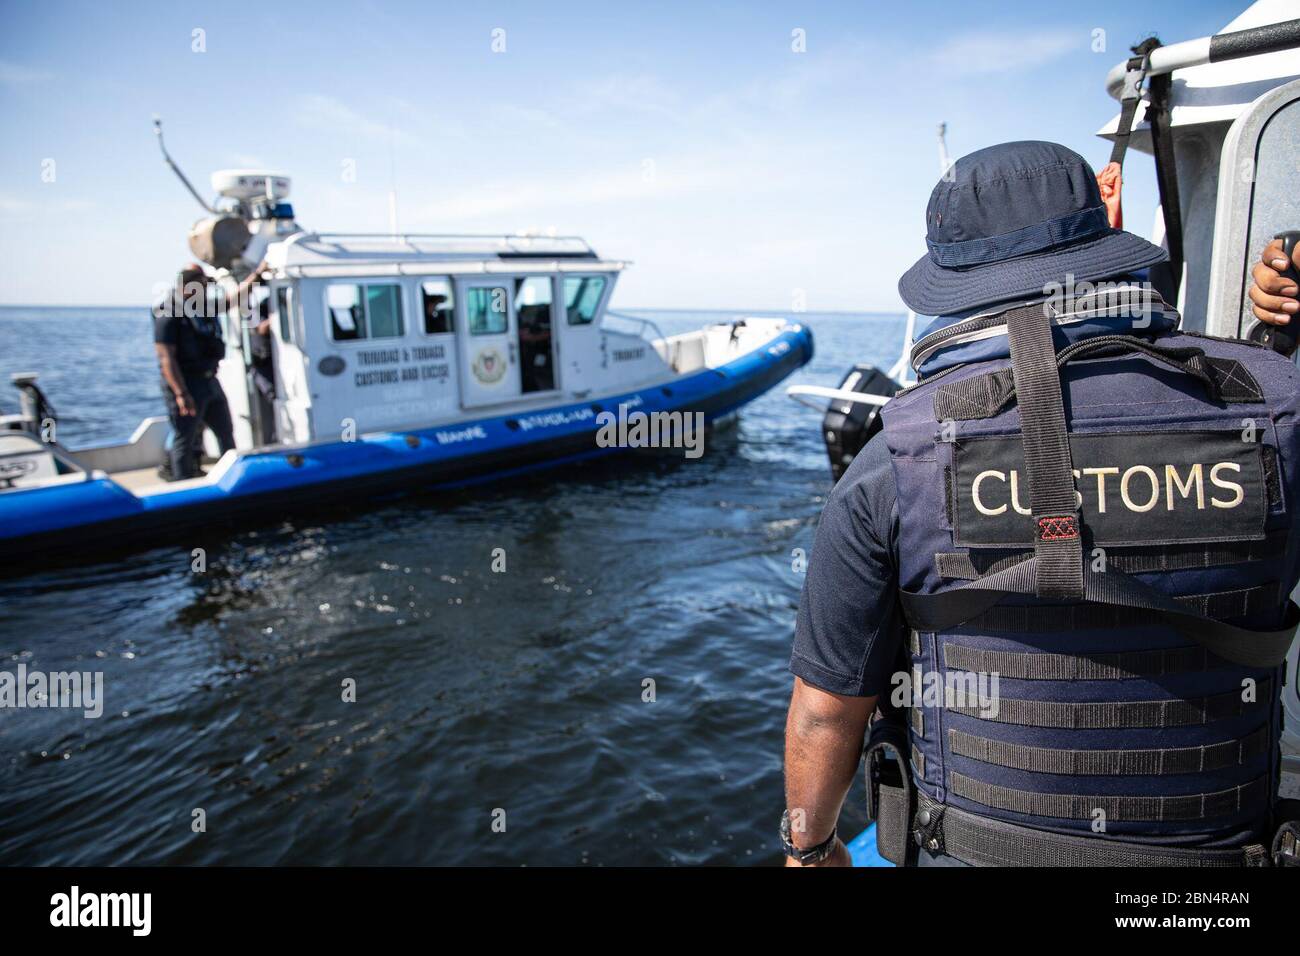 Trinidad and Tobago Customs and Excise SAFE boats reconvene off the coast of Chaguaramas, Trinidad after scenario-based trainings conducted by U.S. Customs and Border Protection Air and Marine Operations off the coast of off the coast of Chaguaramas, Trinidad, Sept. 26, 2019. CBP Stock Photo